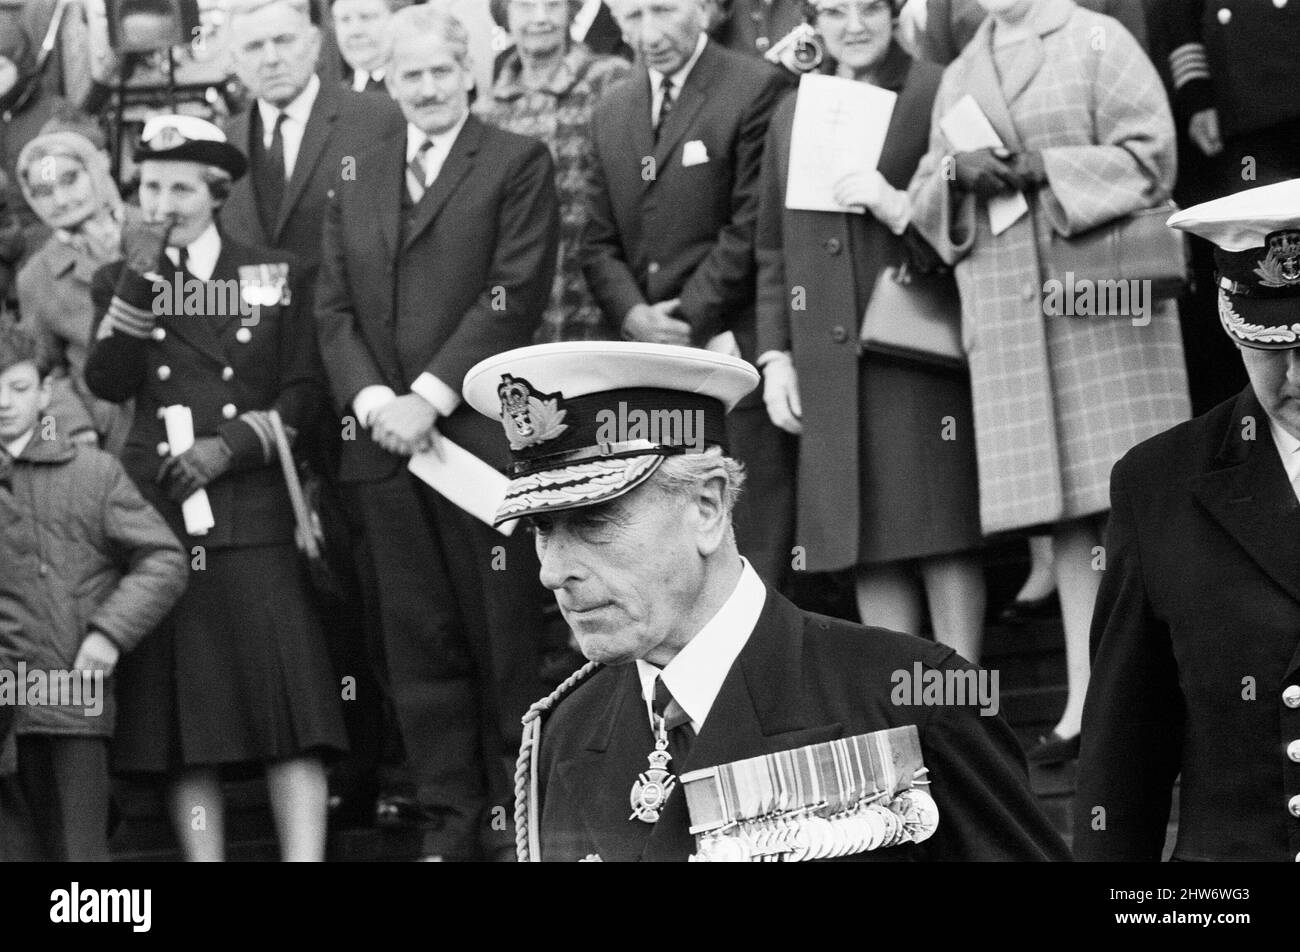 Service held at Liverpool Cathedral to commemorate the 25th anniversary of the Battle of the Atlantic. Admiral of the Fleet, Earl Mountbatten, takes the salute on the steps of the Anglican Cathedral. The HQ of the Battle of the Atlantic was in Liverpool during the Second World War. 5th May 1968. Stock Photo